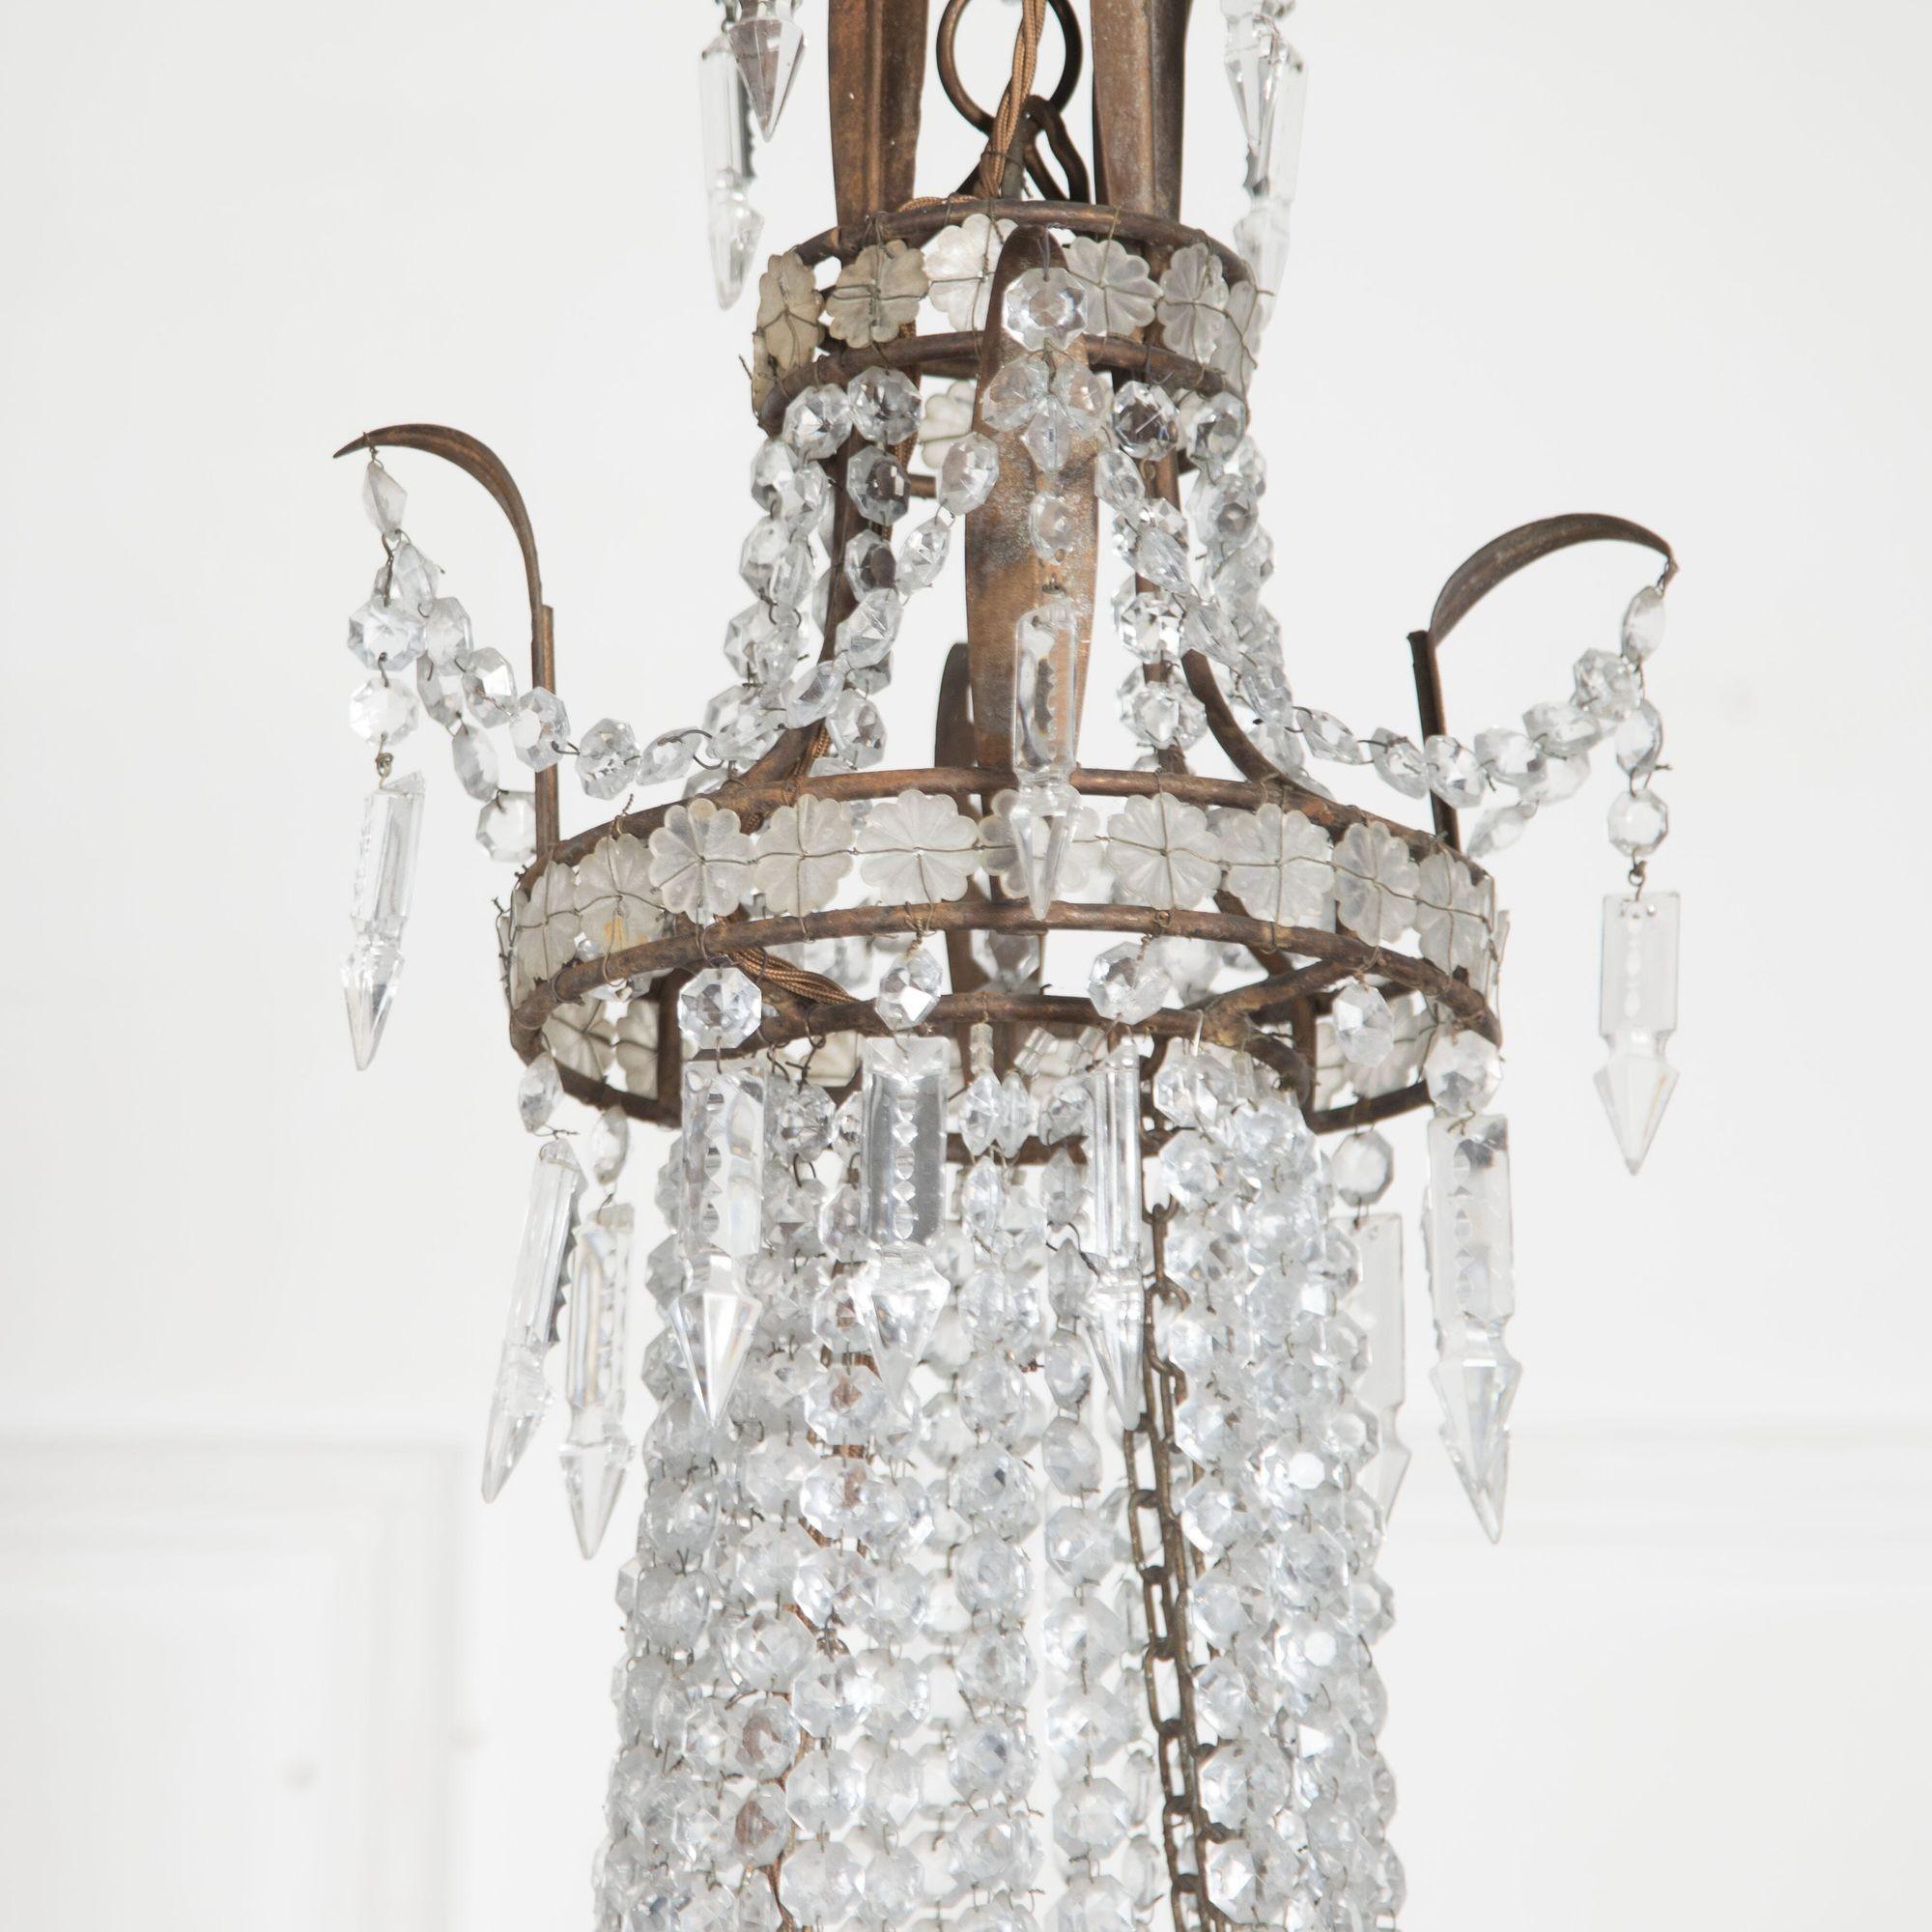 Glass Pair of Mid-20th Century Italian Chandeliers